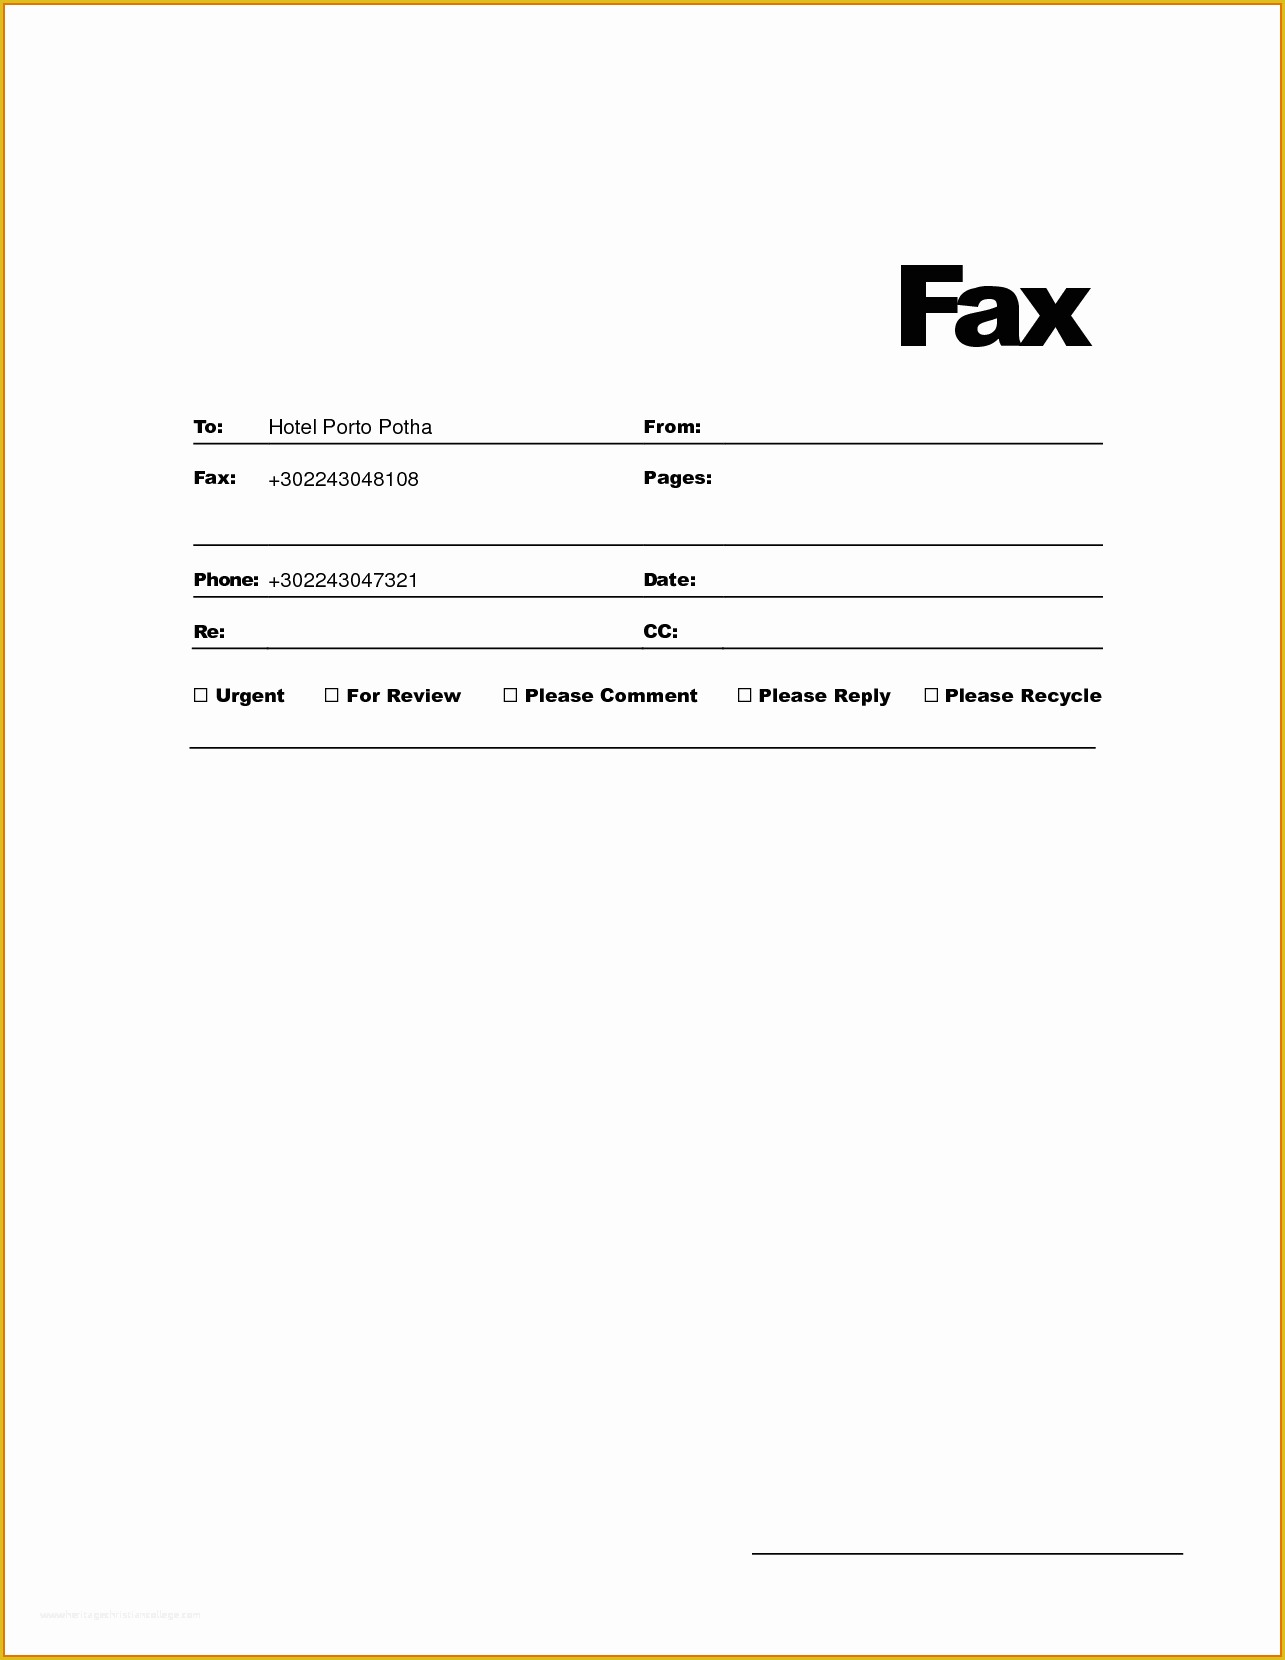 Fax Template Free Of Fax Cover Sheet Template for Wordreference Letters Words